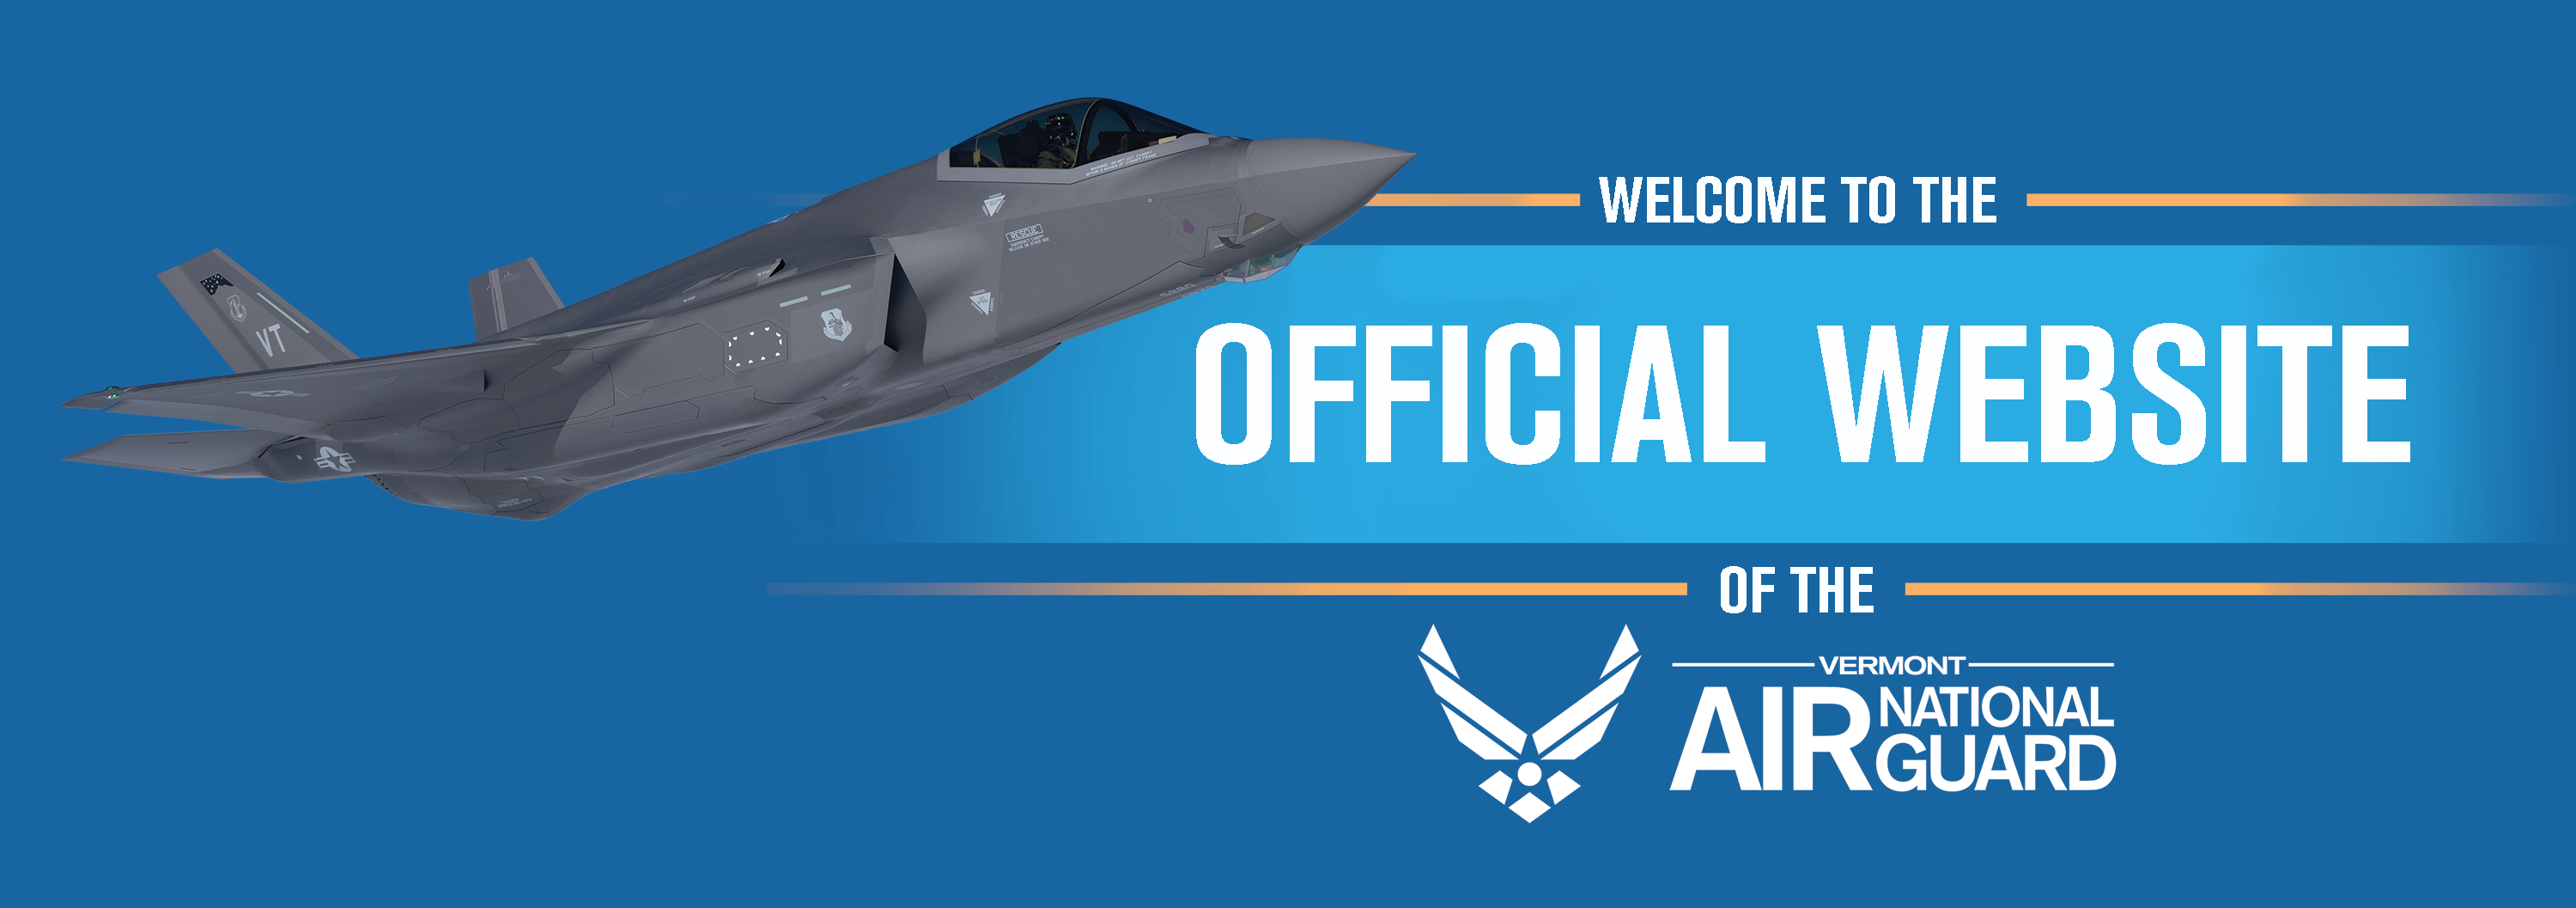 Banner with an F-35 stating "welcome to the official website of the Vermont Air National Guard"